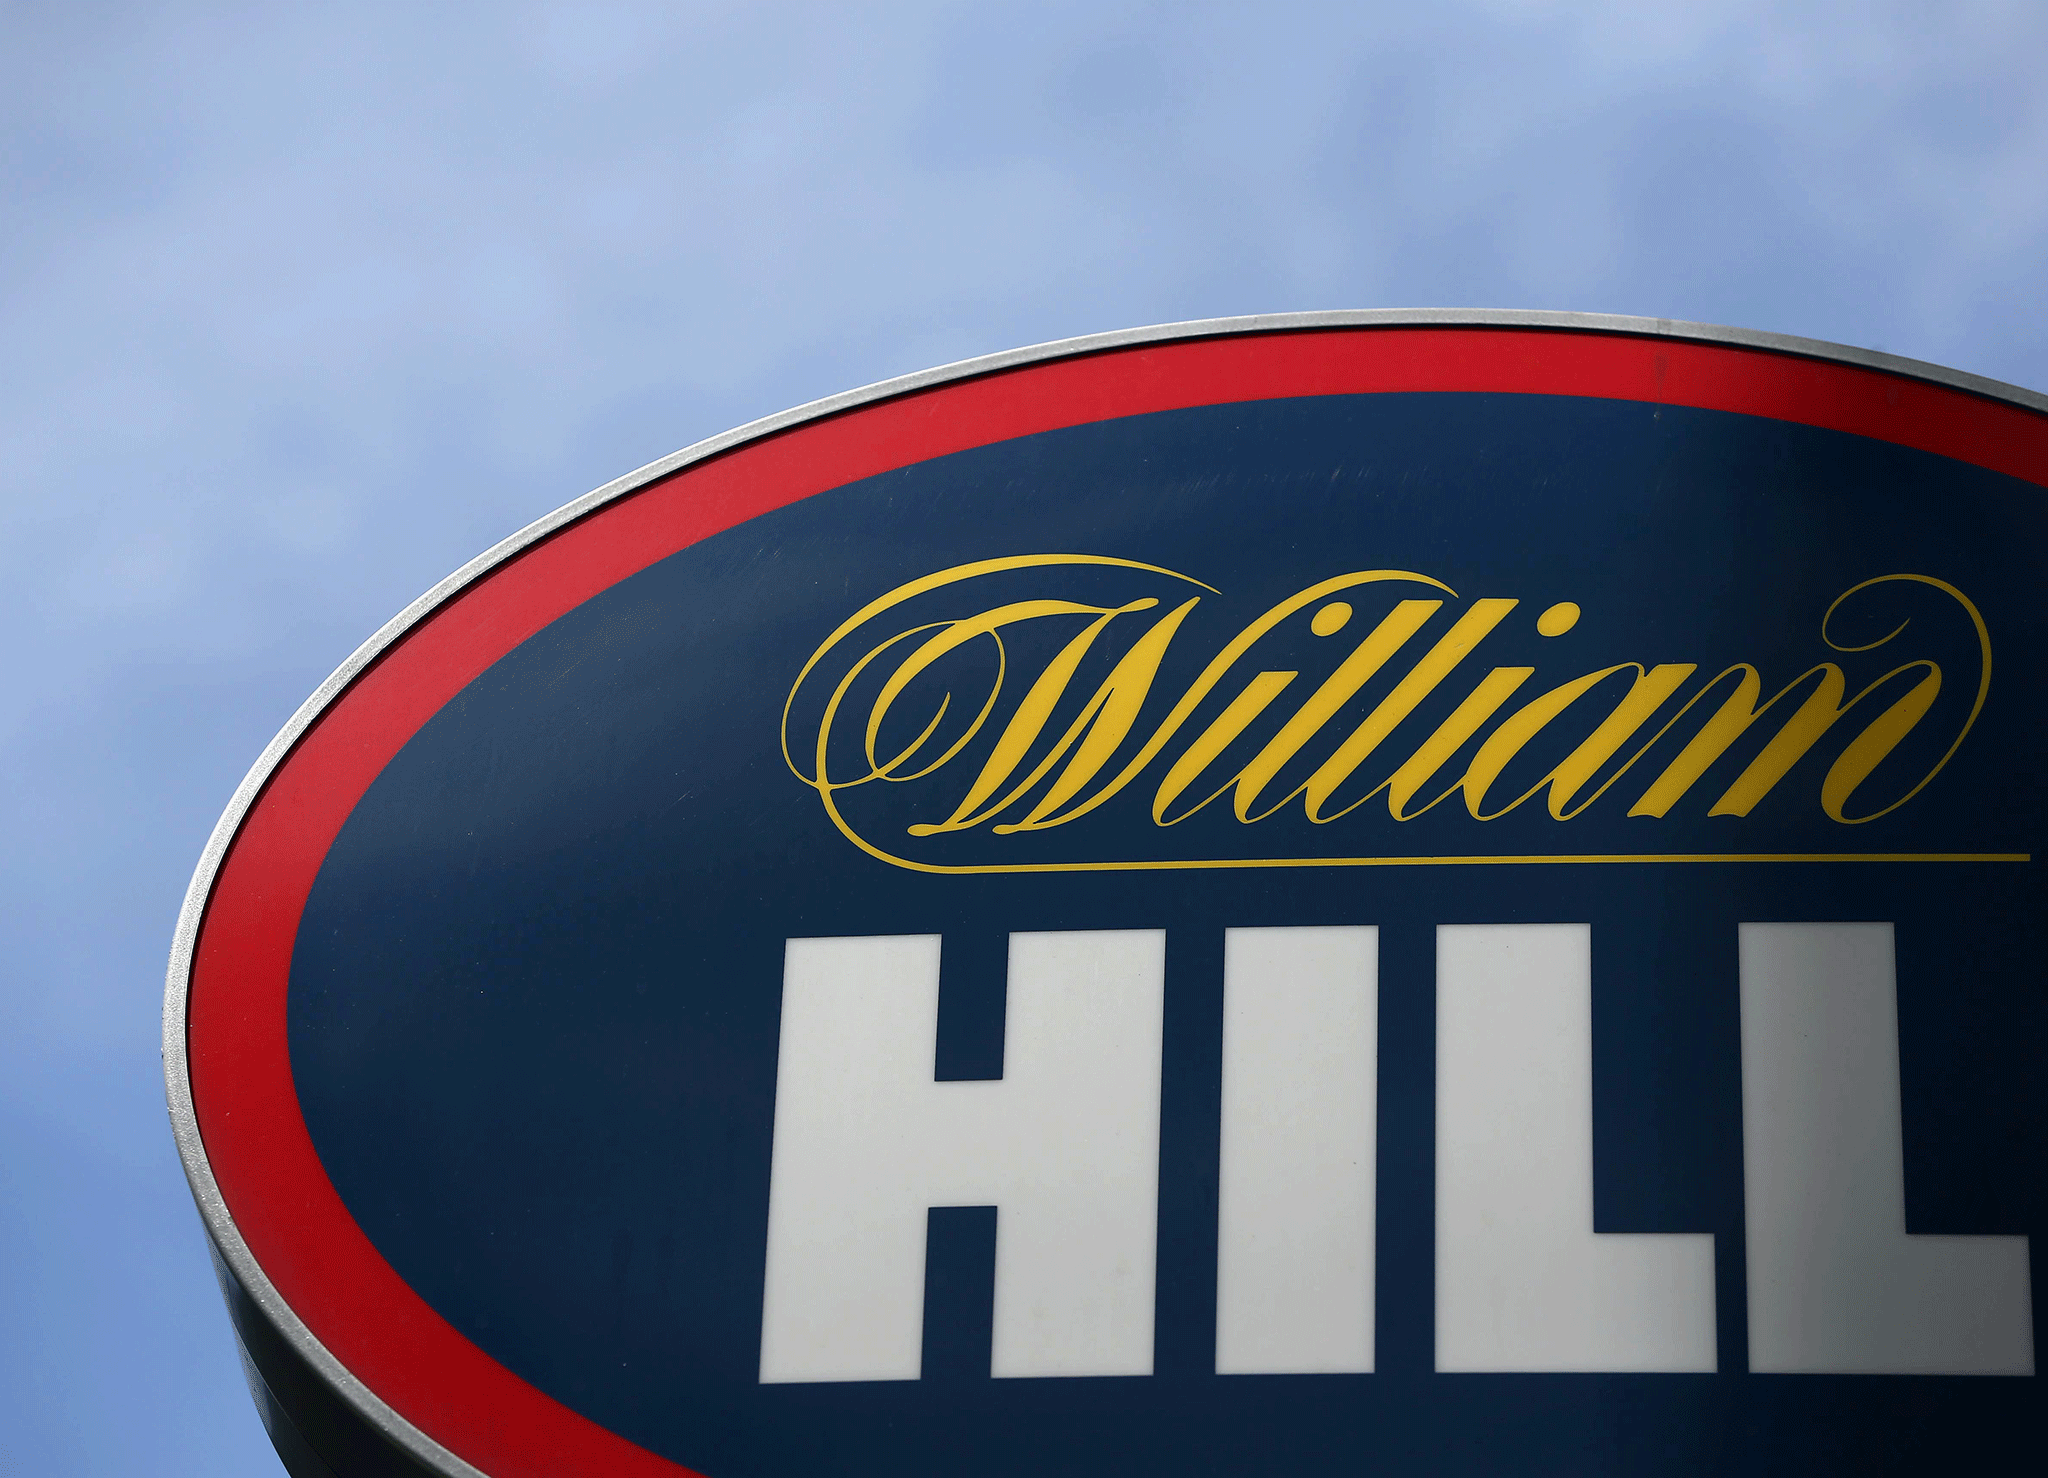 Shares in William Hill were trading more than 13 per cent lower on Monday morning